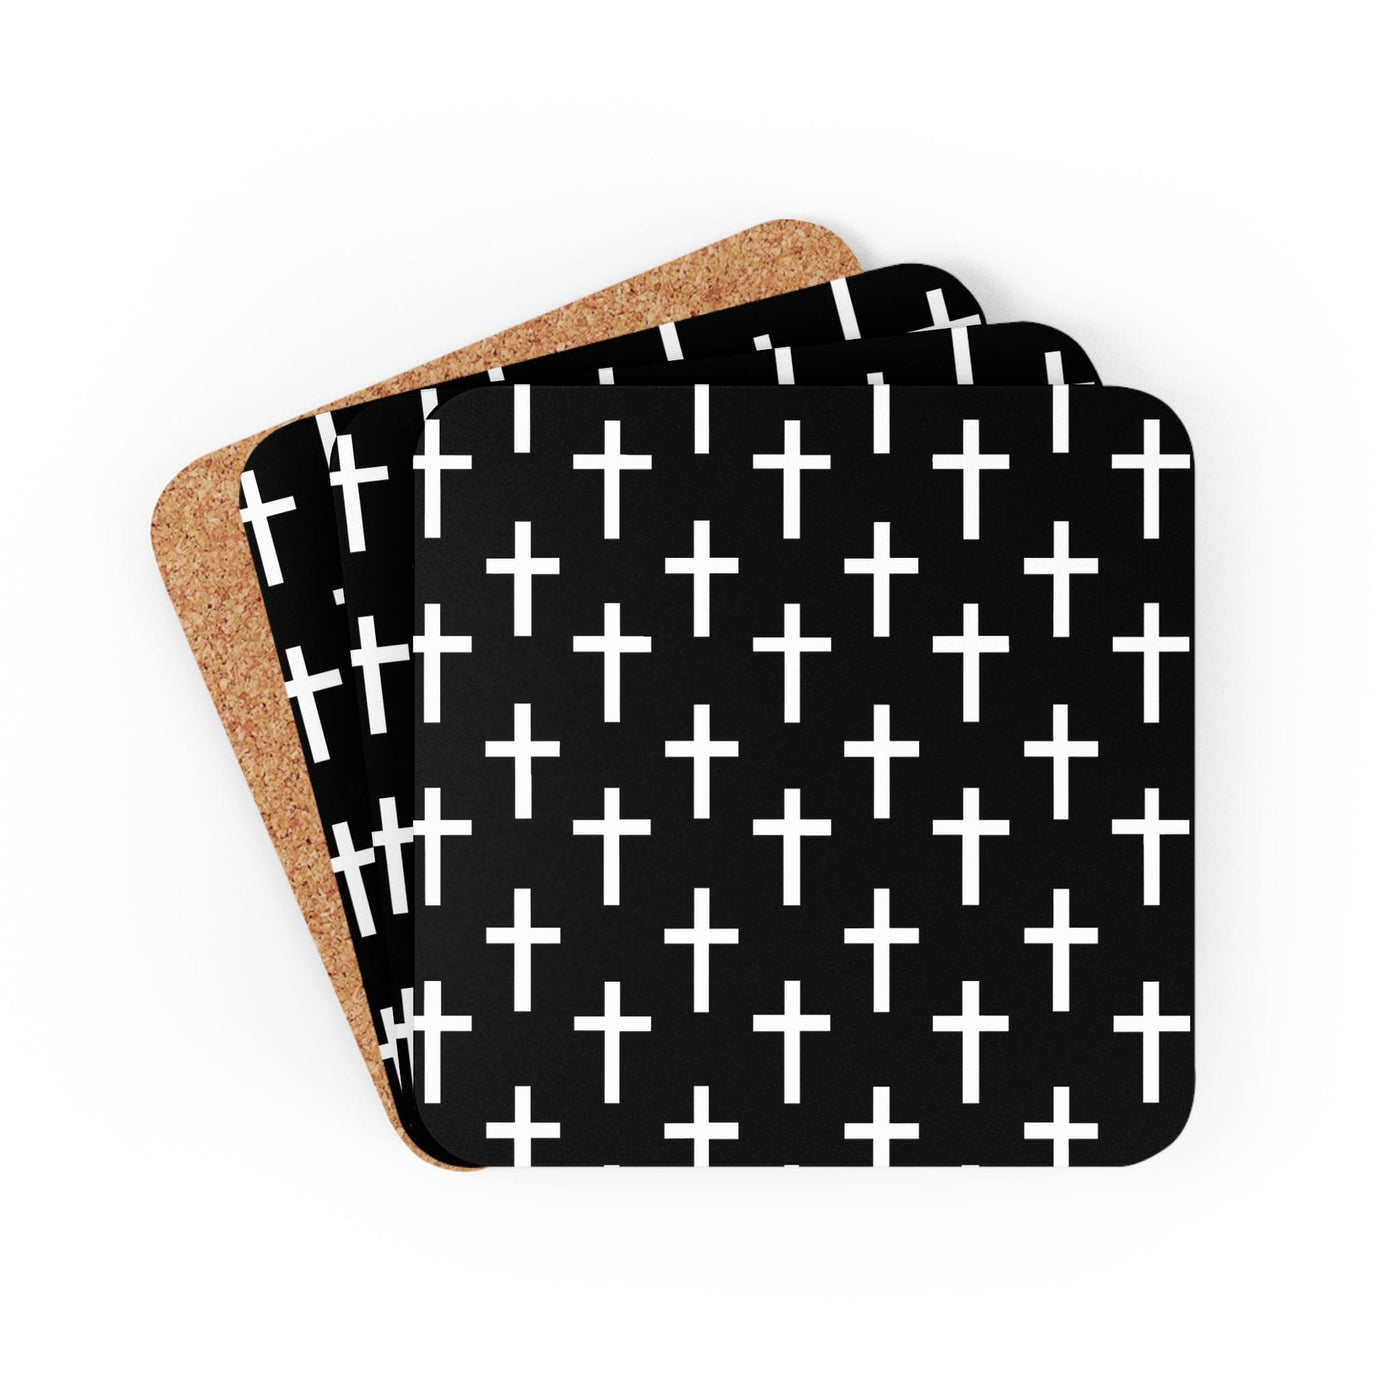 Coaster Set Of 4 For Drinks Black And White Seamless Cross Pattern - Decorative